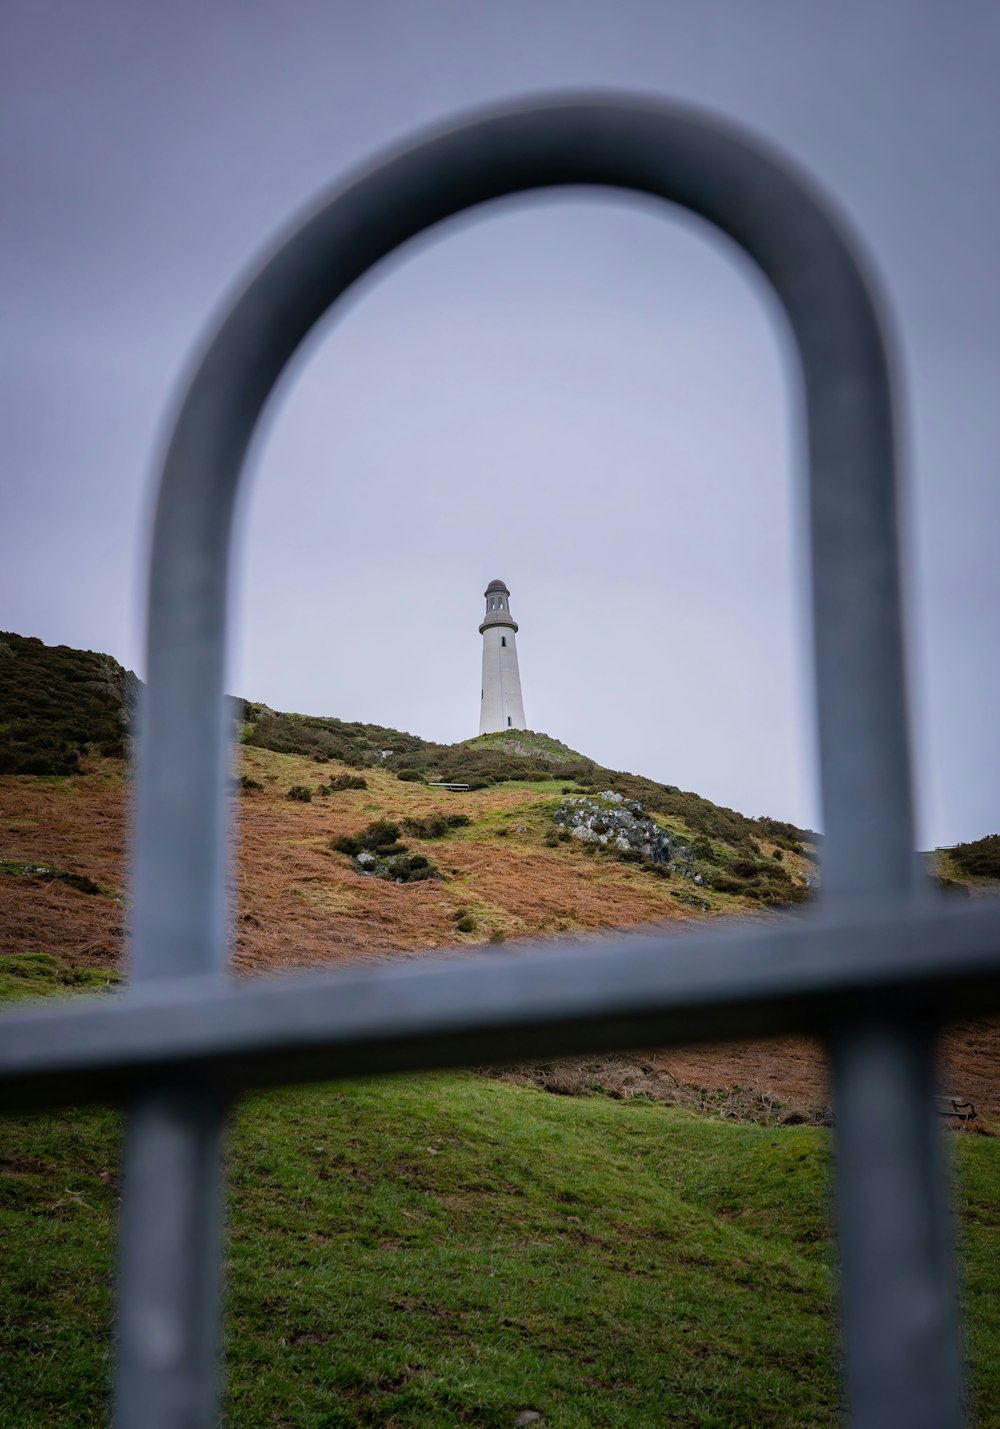 a view of a lighthouse through a metal fence